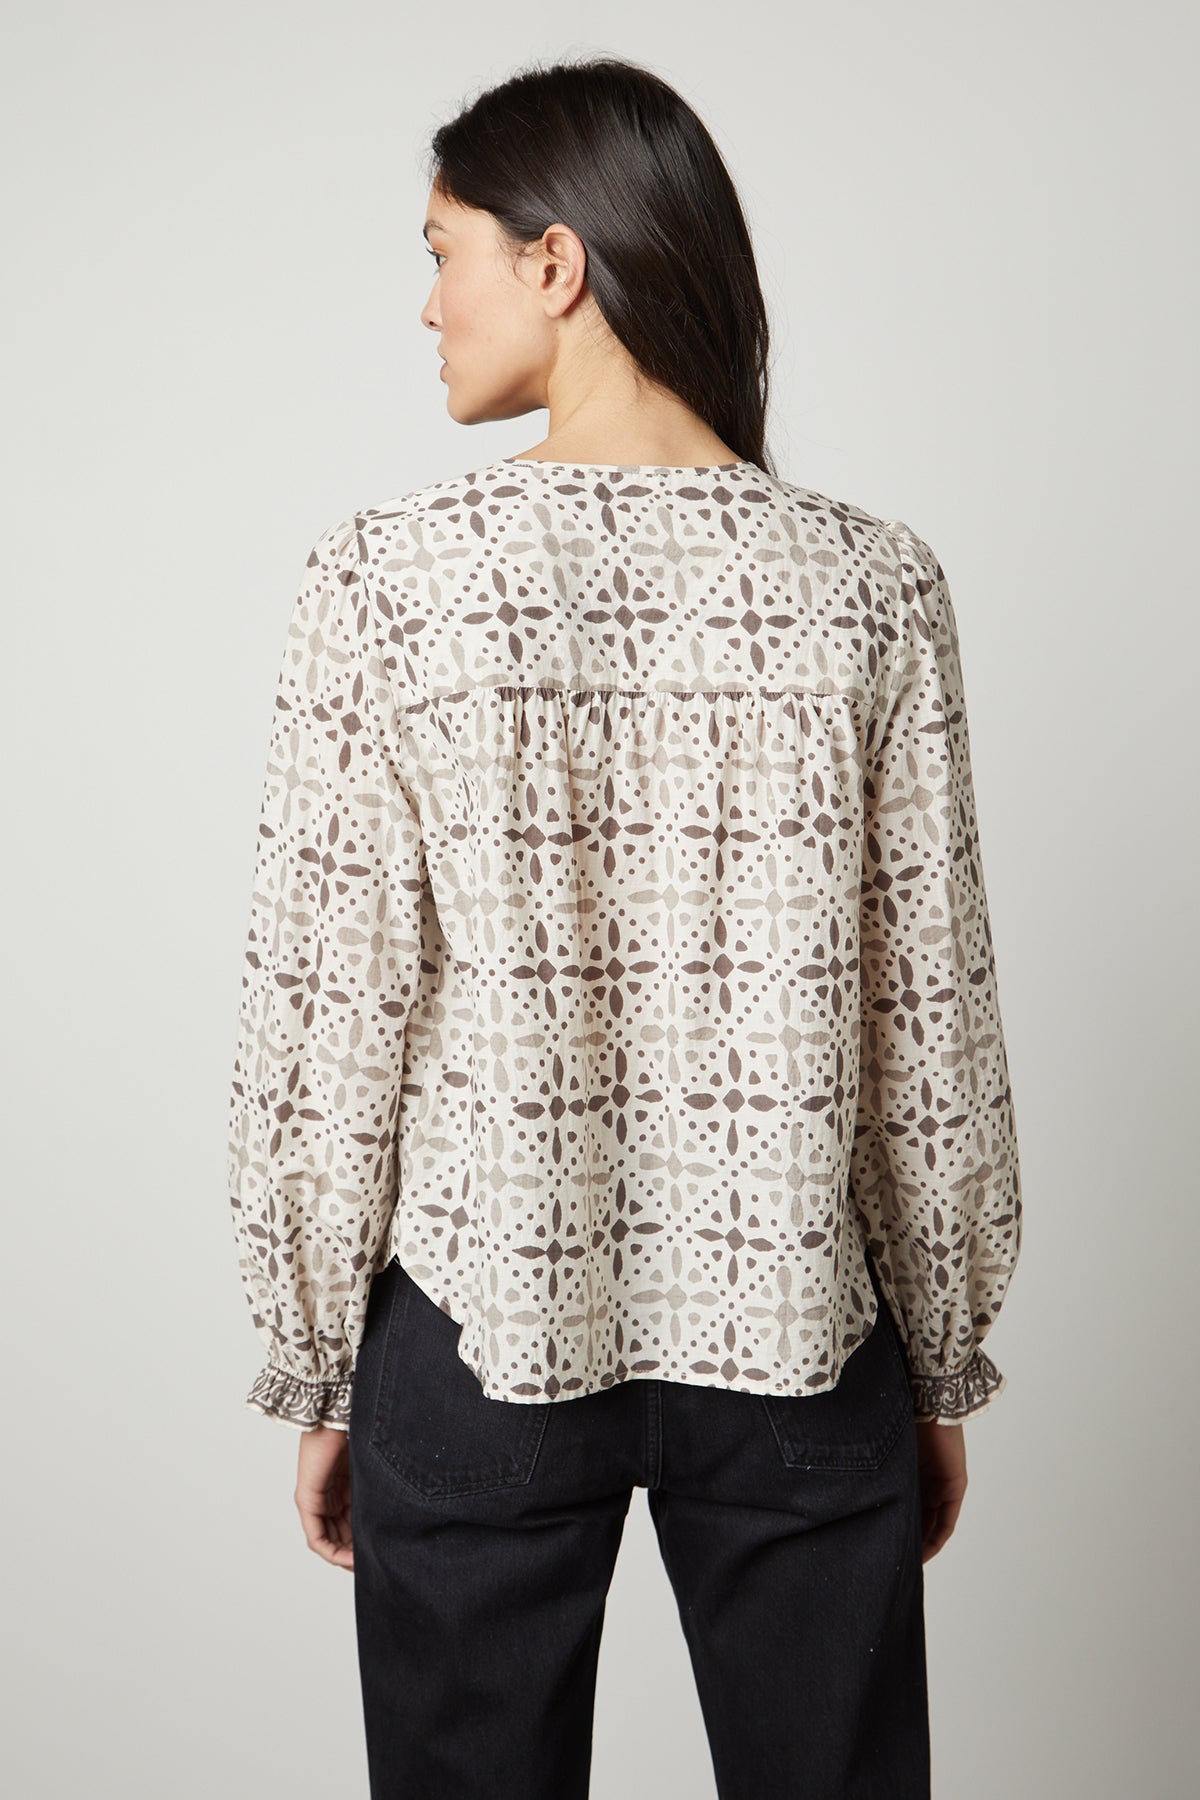 The back view of a woman wearing the Velvet by Graham & Spencer AUDETTE PRINTED BOHO TOP with a geometric pattern in earth tones.-26727043989697